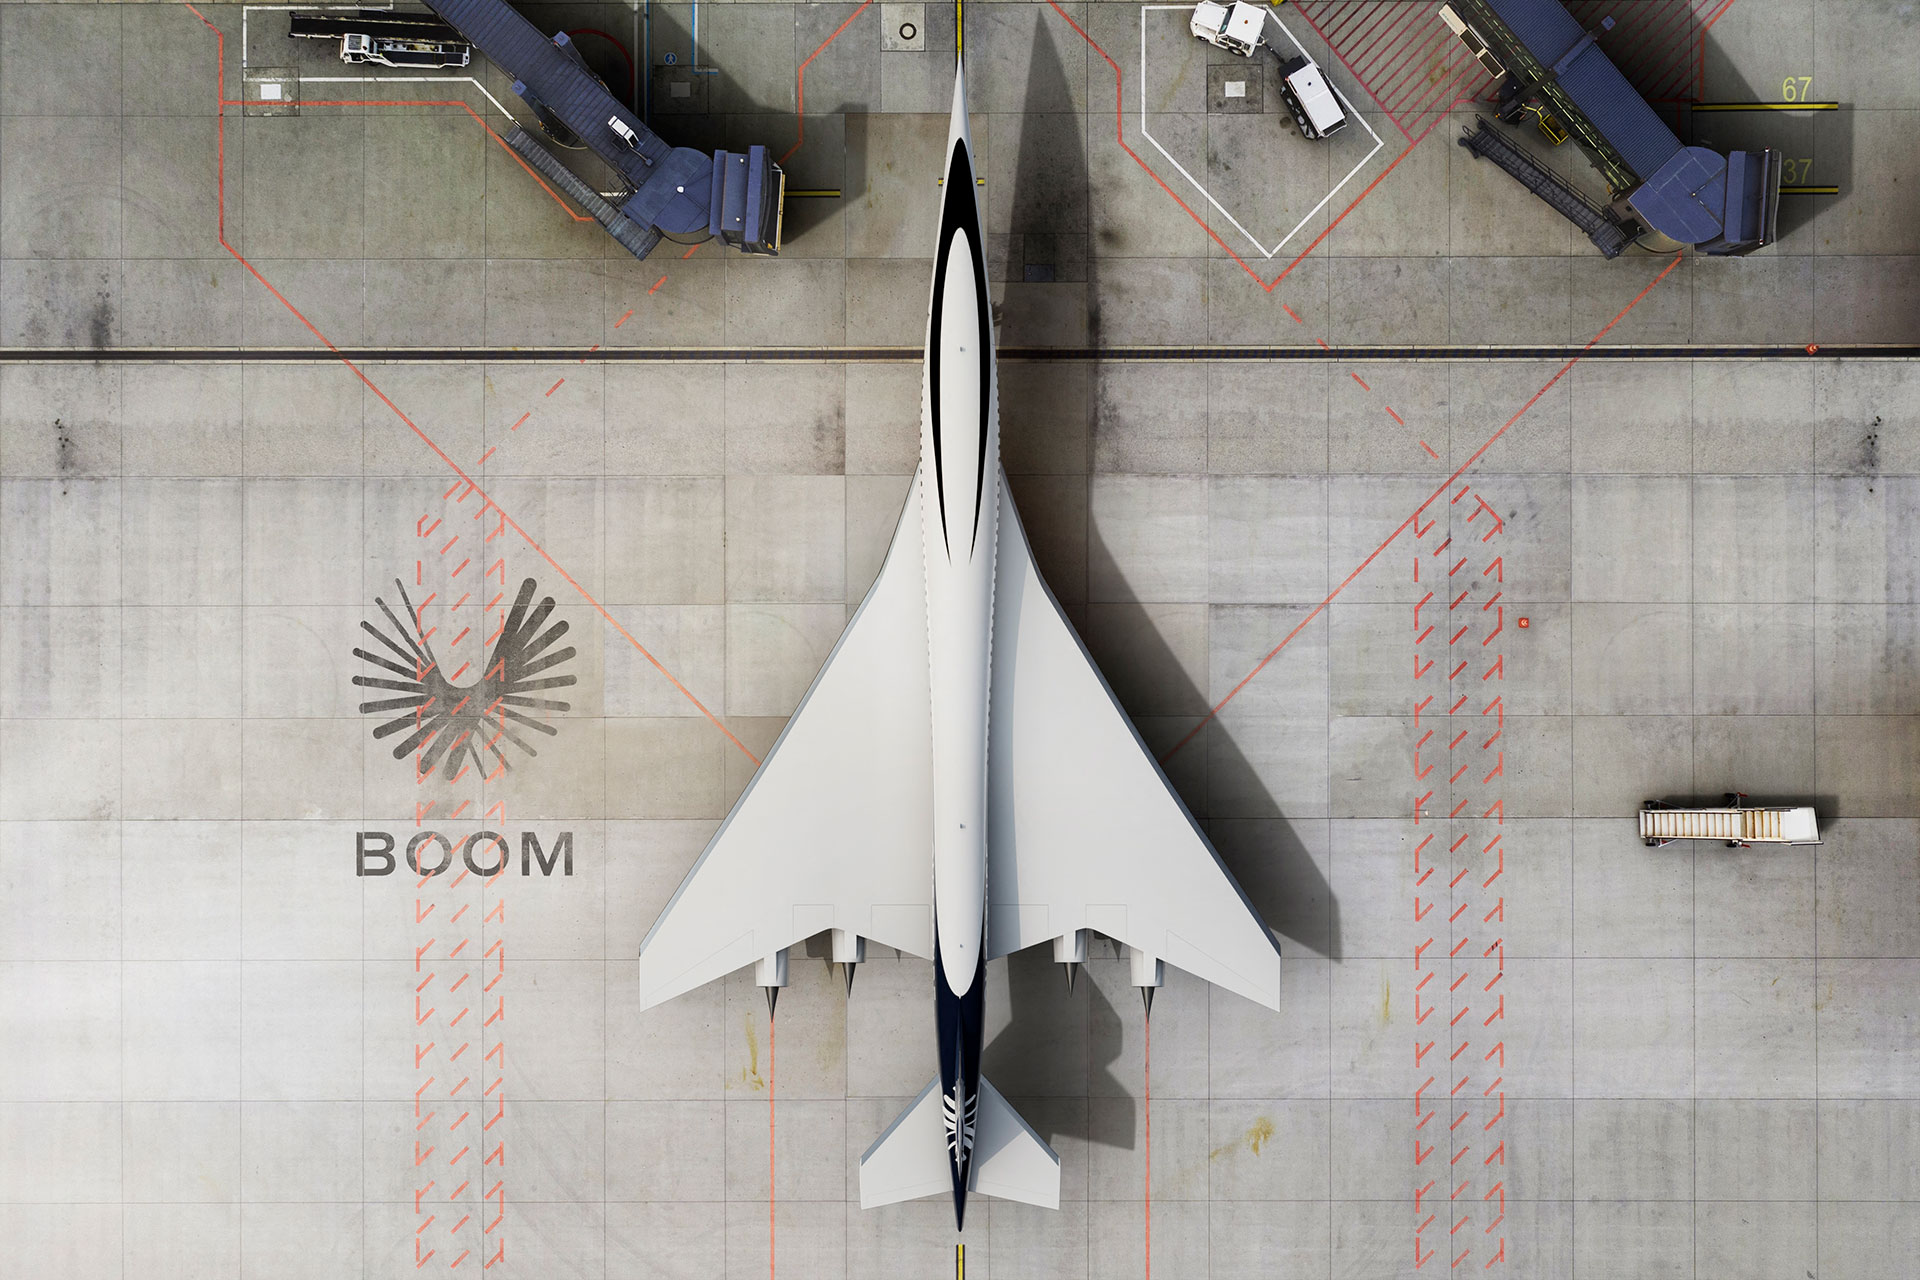 The first supersonic model of Boom Supersonic would start manufacturing in 2024, it will not be until 2025 that the plane will leave the assembly line, and its operations with passengers will not be possible until 2029. (REUTERS)